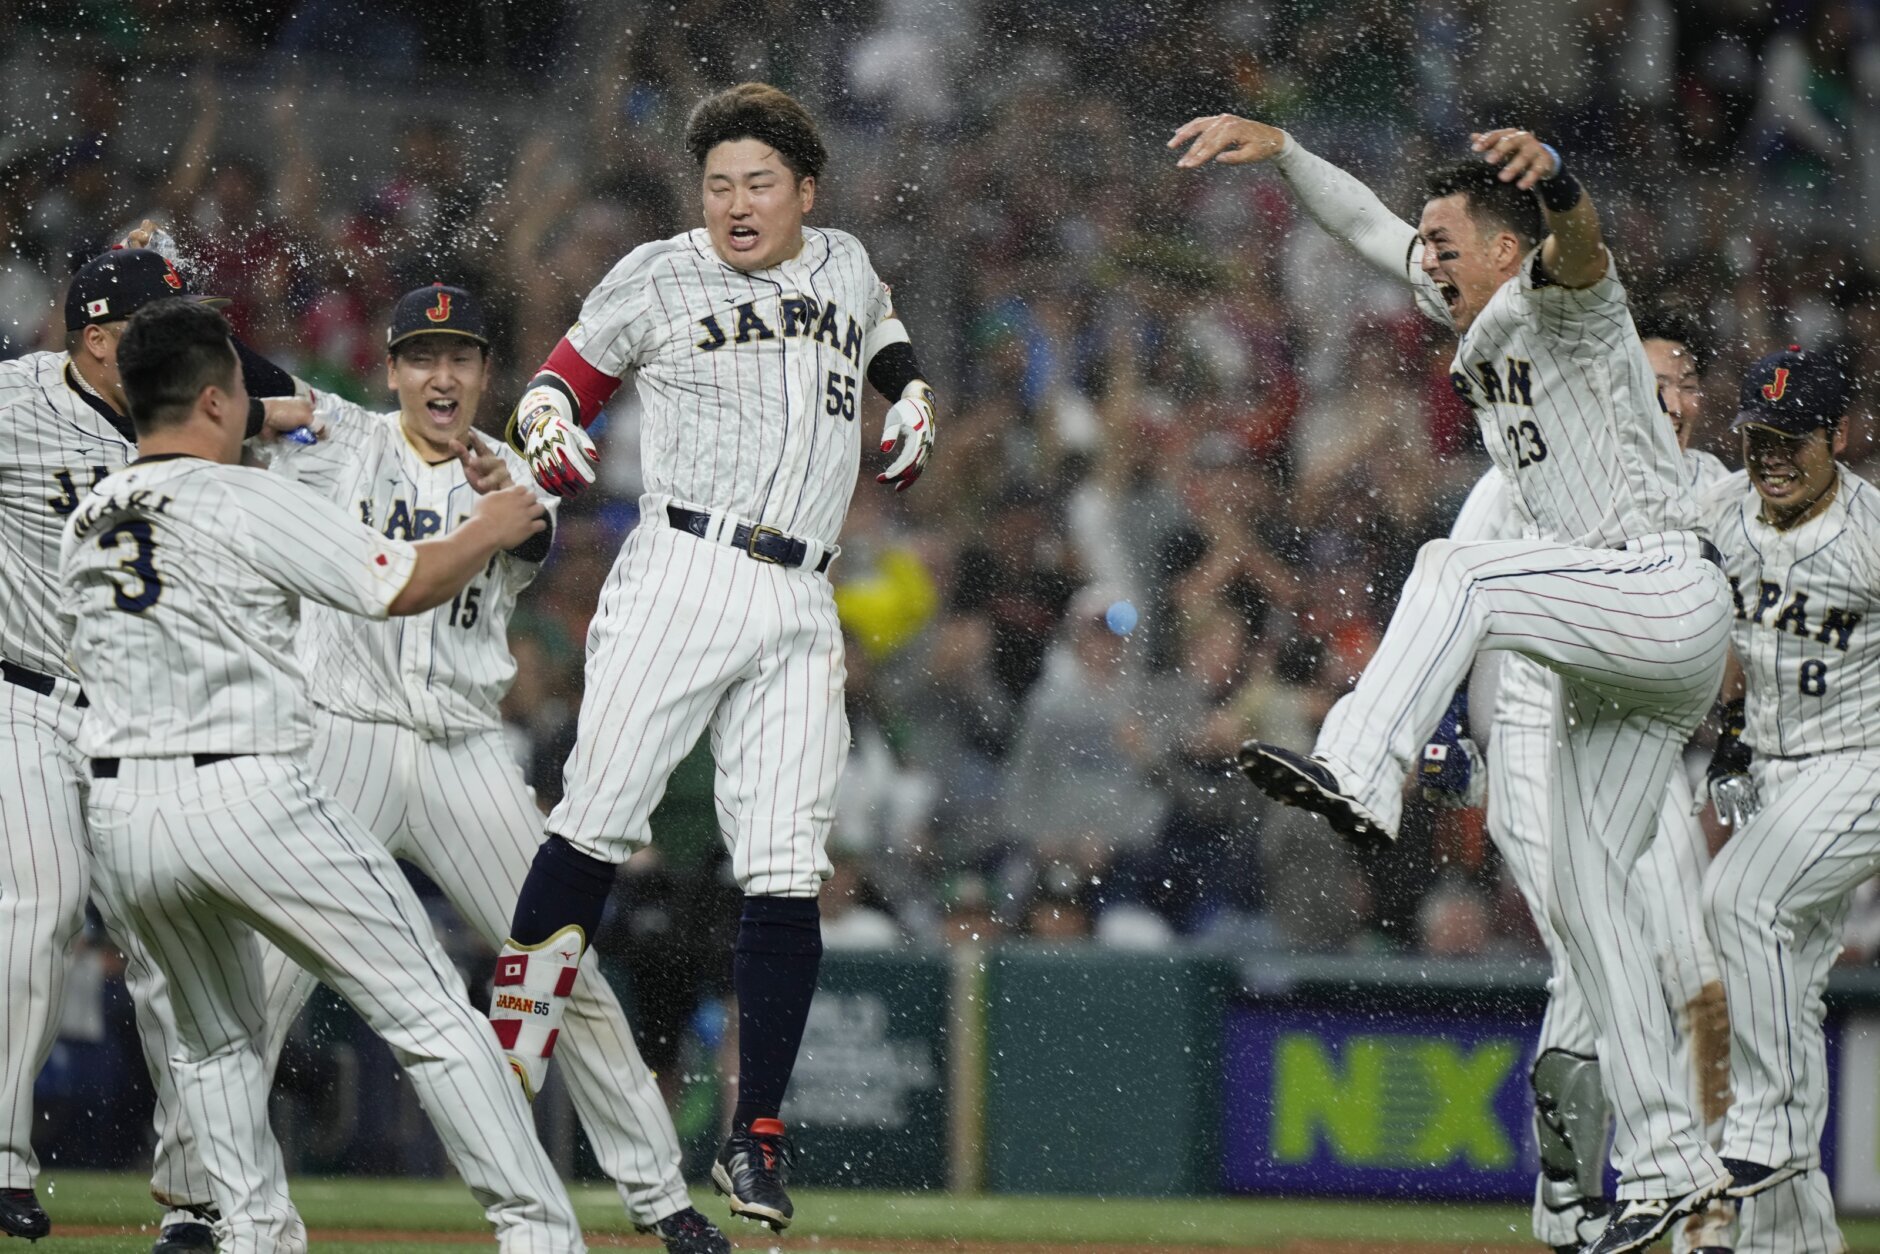 Shohei Ohtani sparks Japan rally to top Mexico in WBC semis